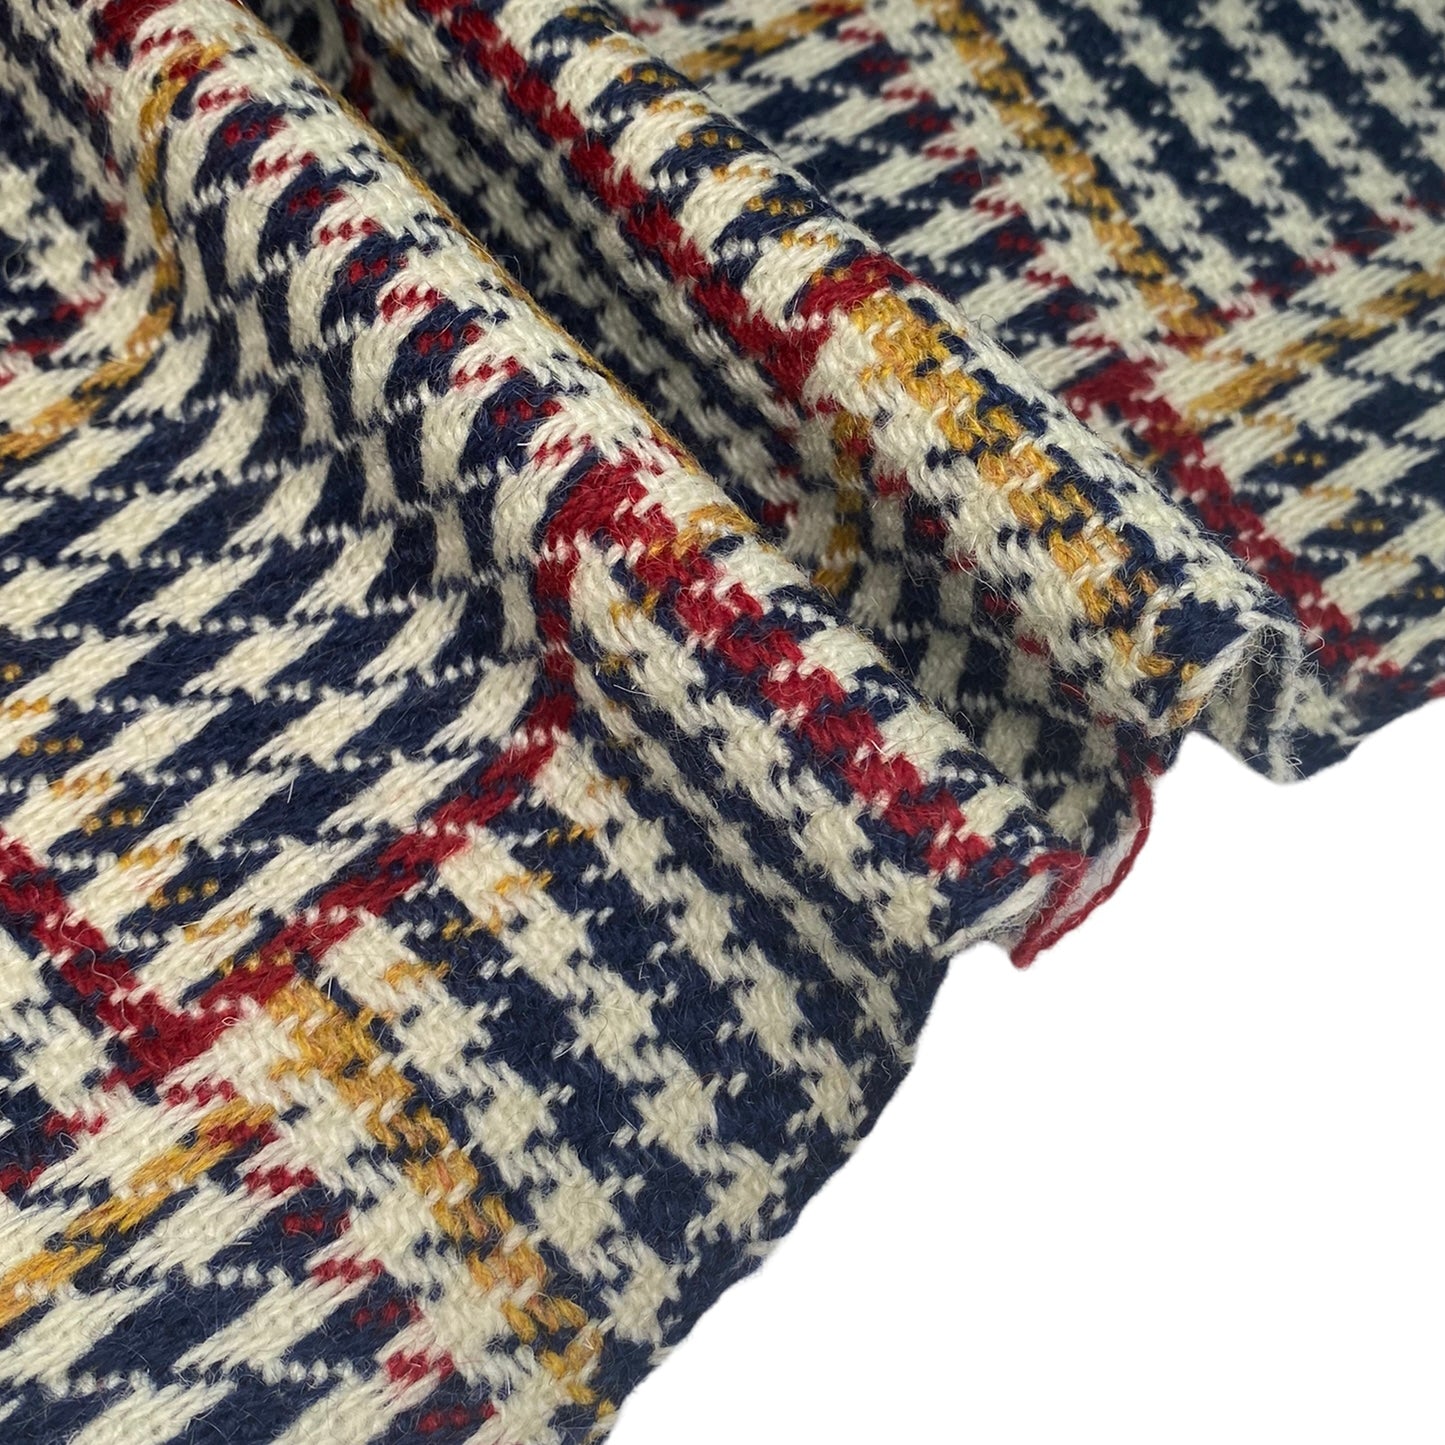 Wool Coating - Houndstooth Plaid - Blue/Cream/Red/Yellow